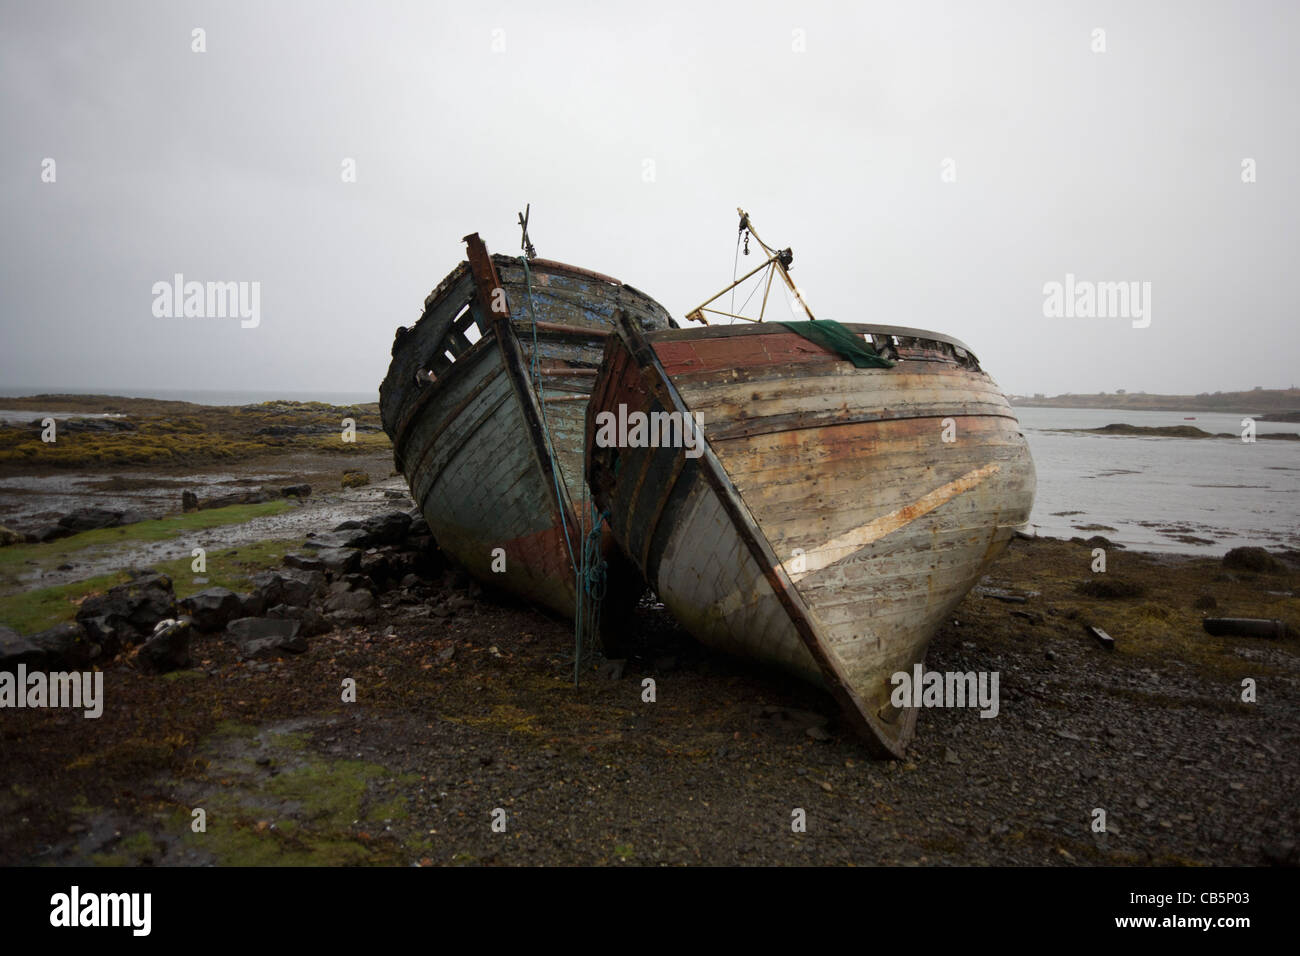 Wrecked fishing boats beached on shore at Salen, Isle of Mull. Stock Photo